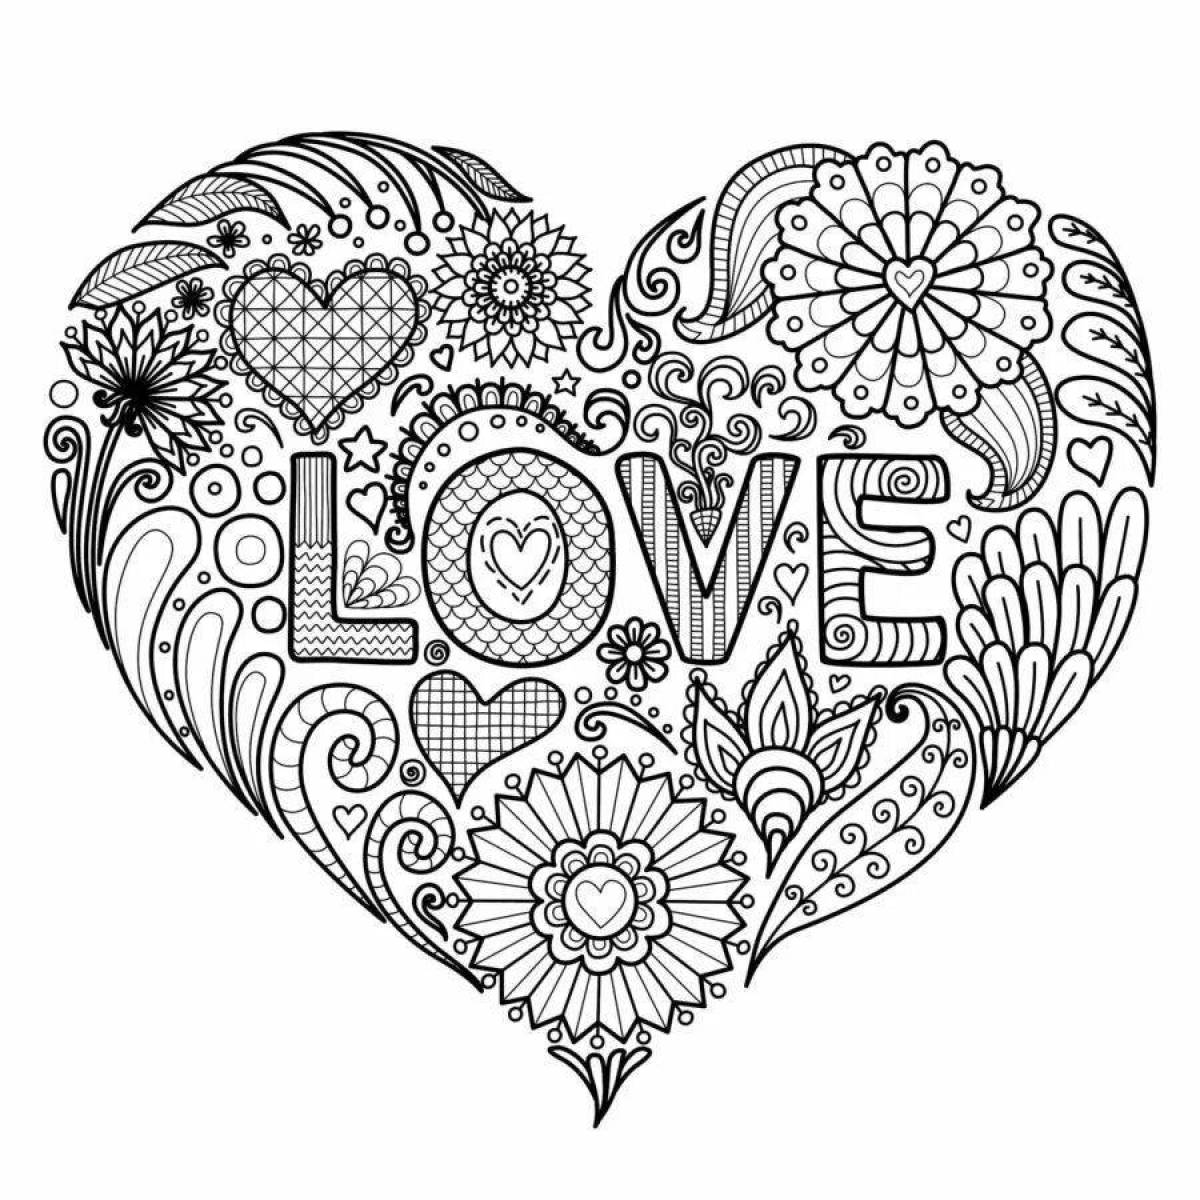 Adorable intricate heart coloring page